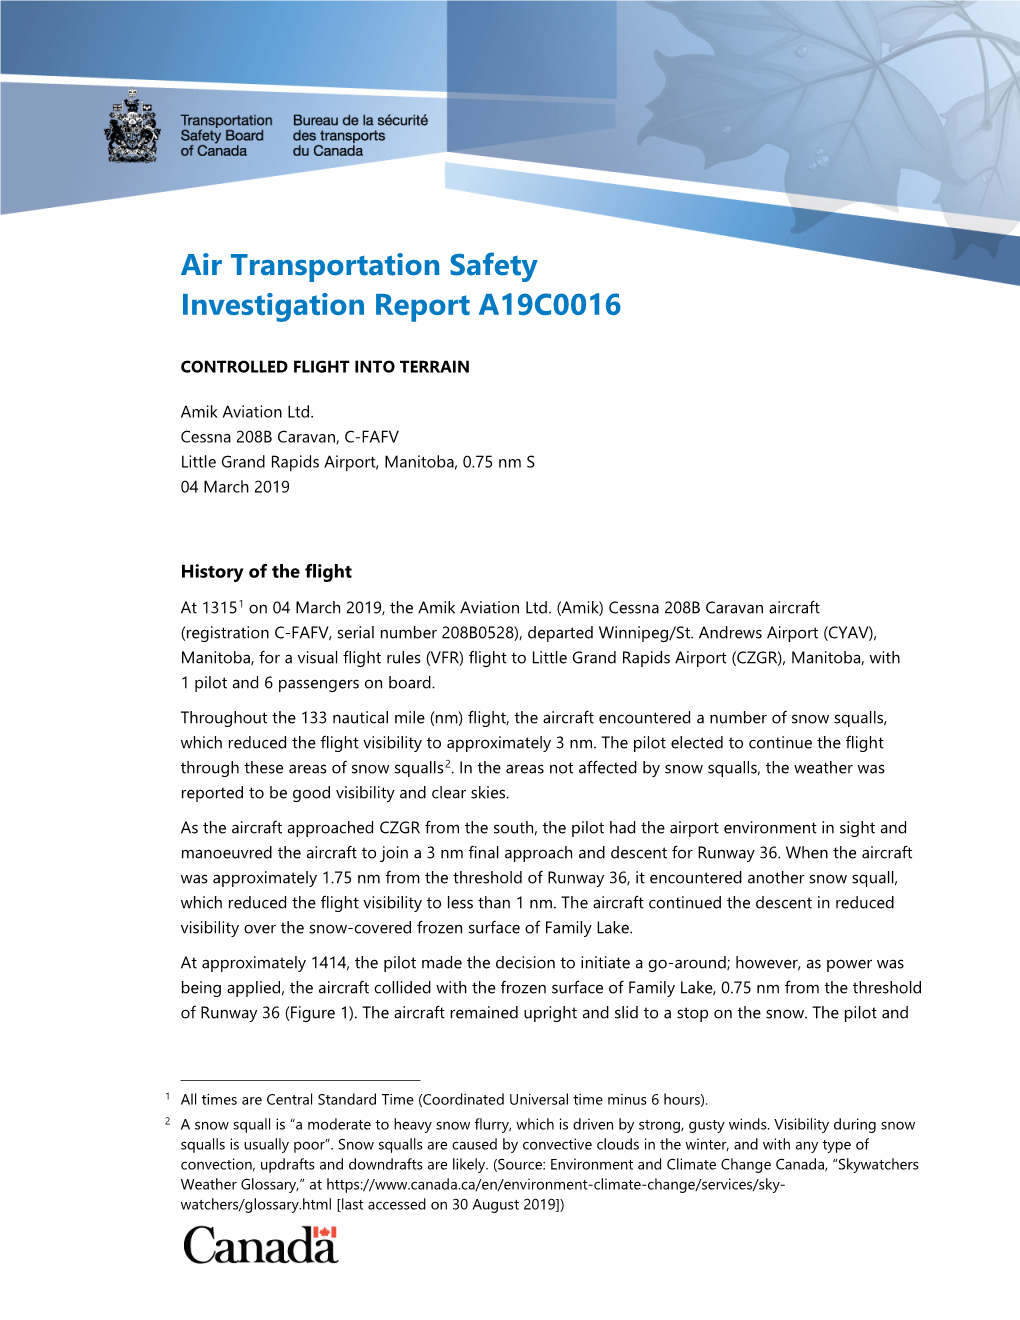 Air Transportation Safety Investigation Report A19C0016